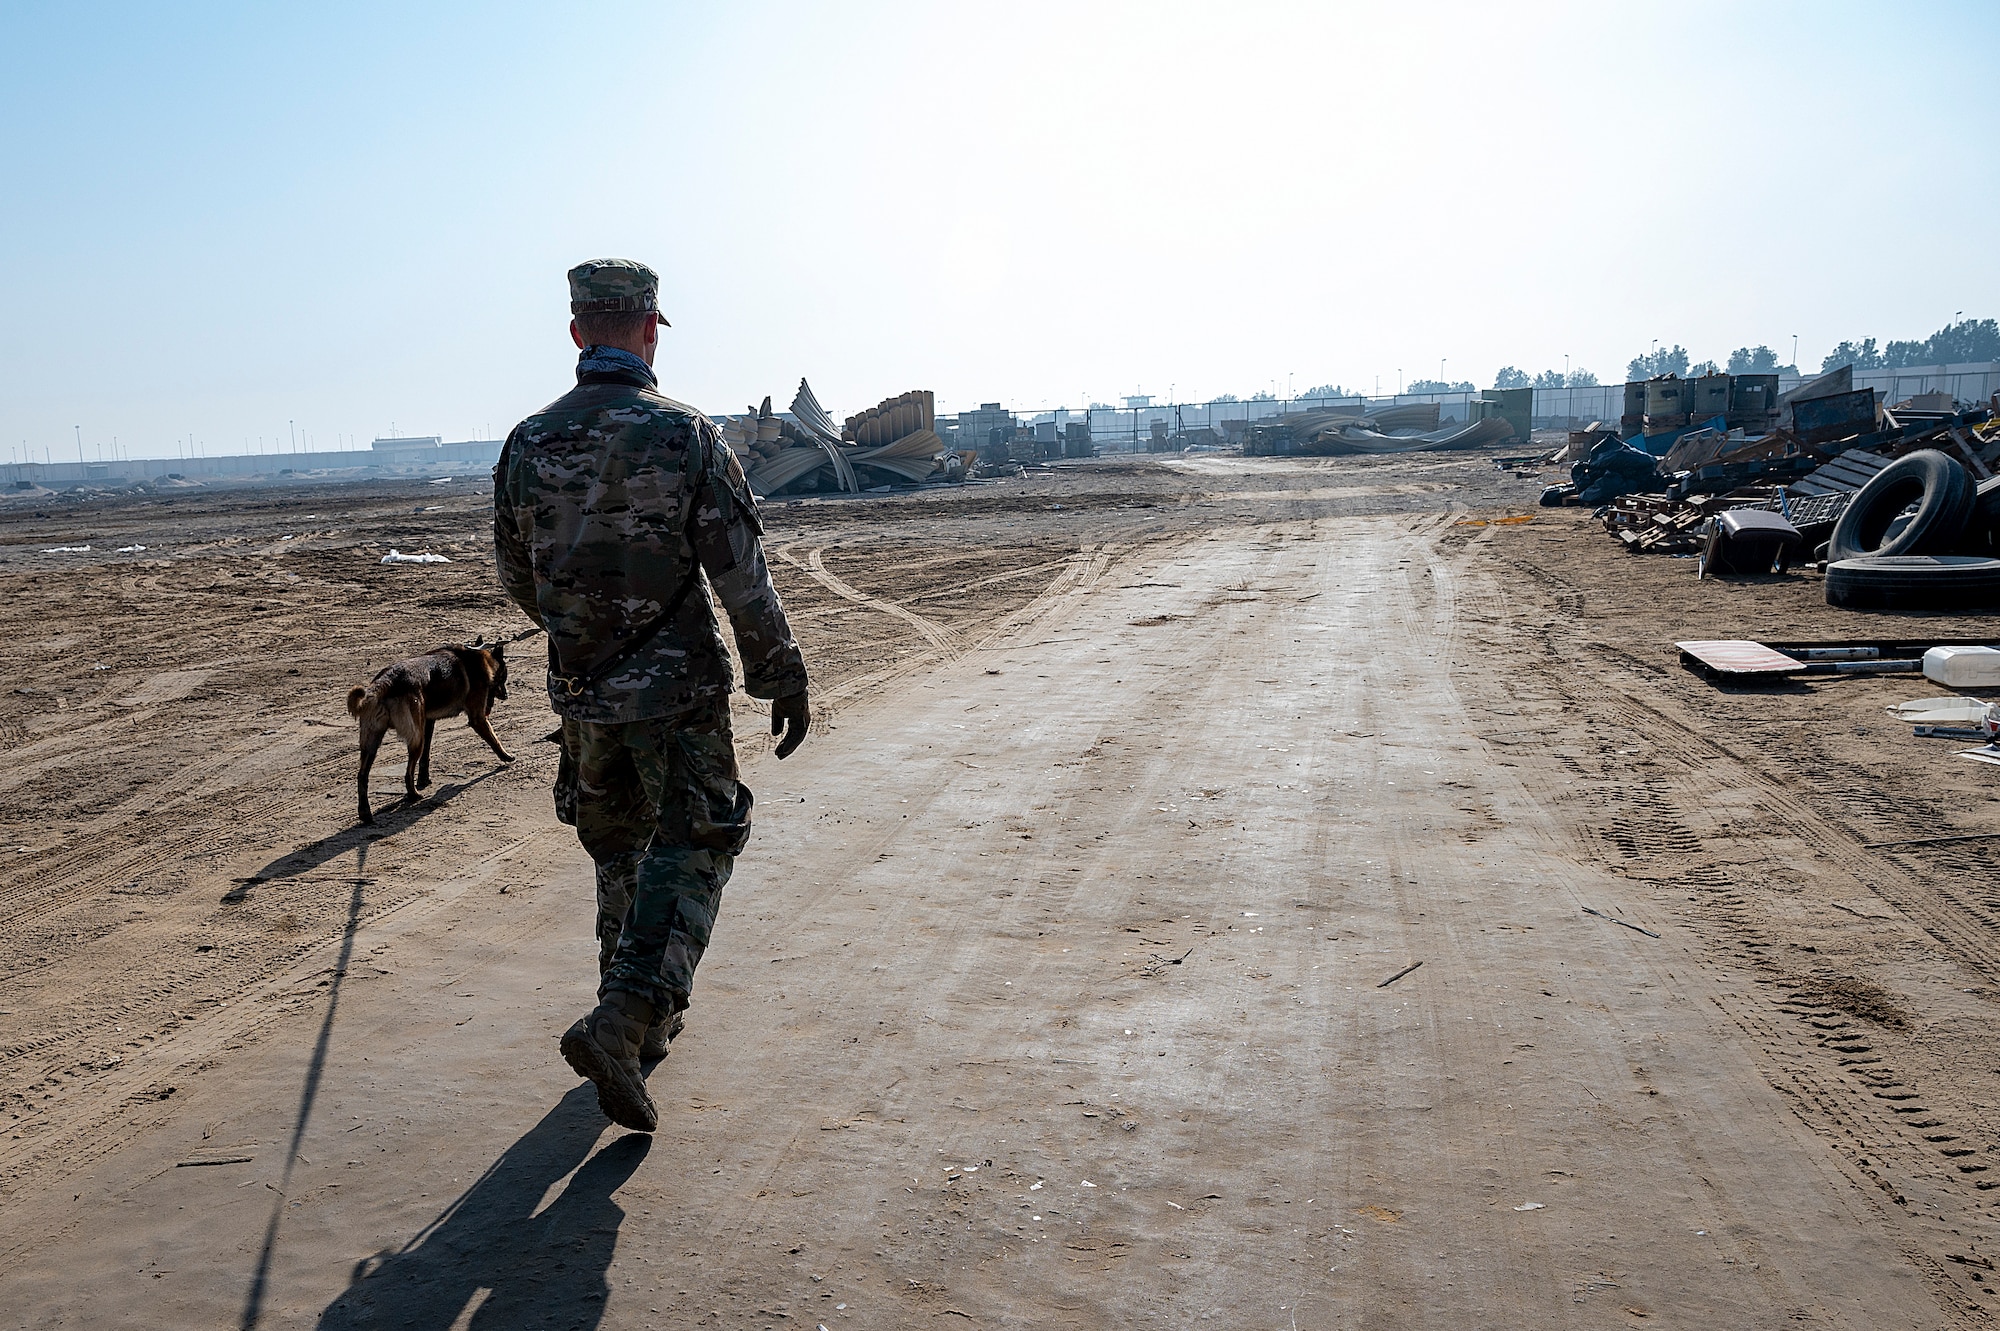 U.S. Air Force Staff Sgt. Tom Schumacher, 380th Expeditionary Security Forces Squadron military working dog (MWD) handler, walks his MWD during a search training scenario at Al Dhafra Air Base, United Arab Emirates, Jan. 28, 2021.